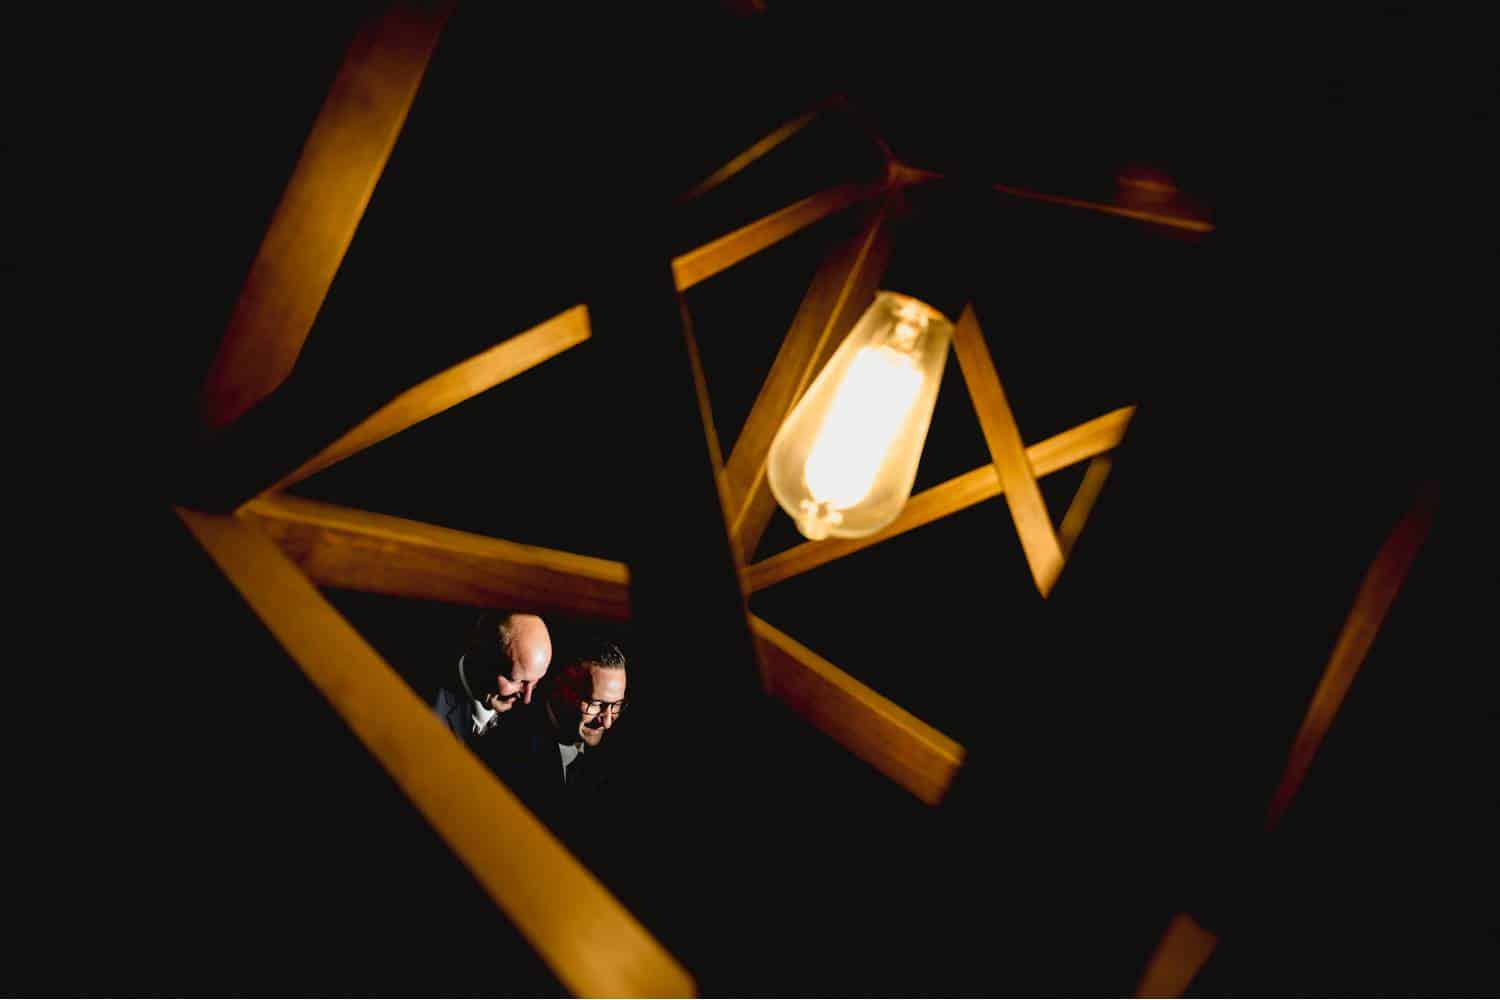 Two grooms' faces are highlighted between the angular bars of a modern light fixture. Black & Gold Photography made this unique wedding portrait using off-camera flash.